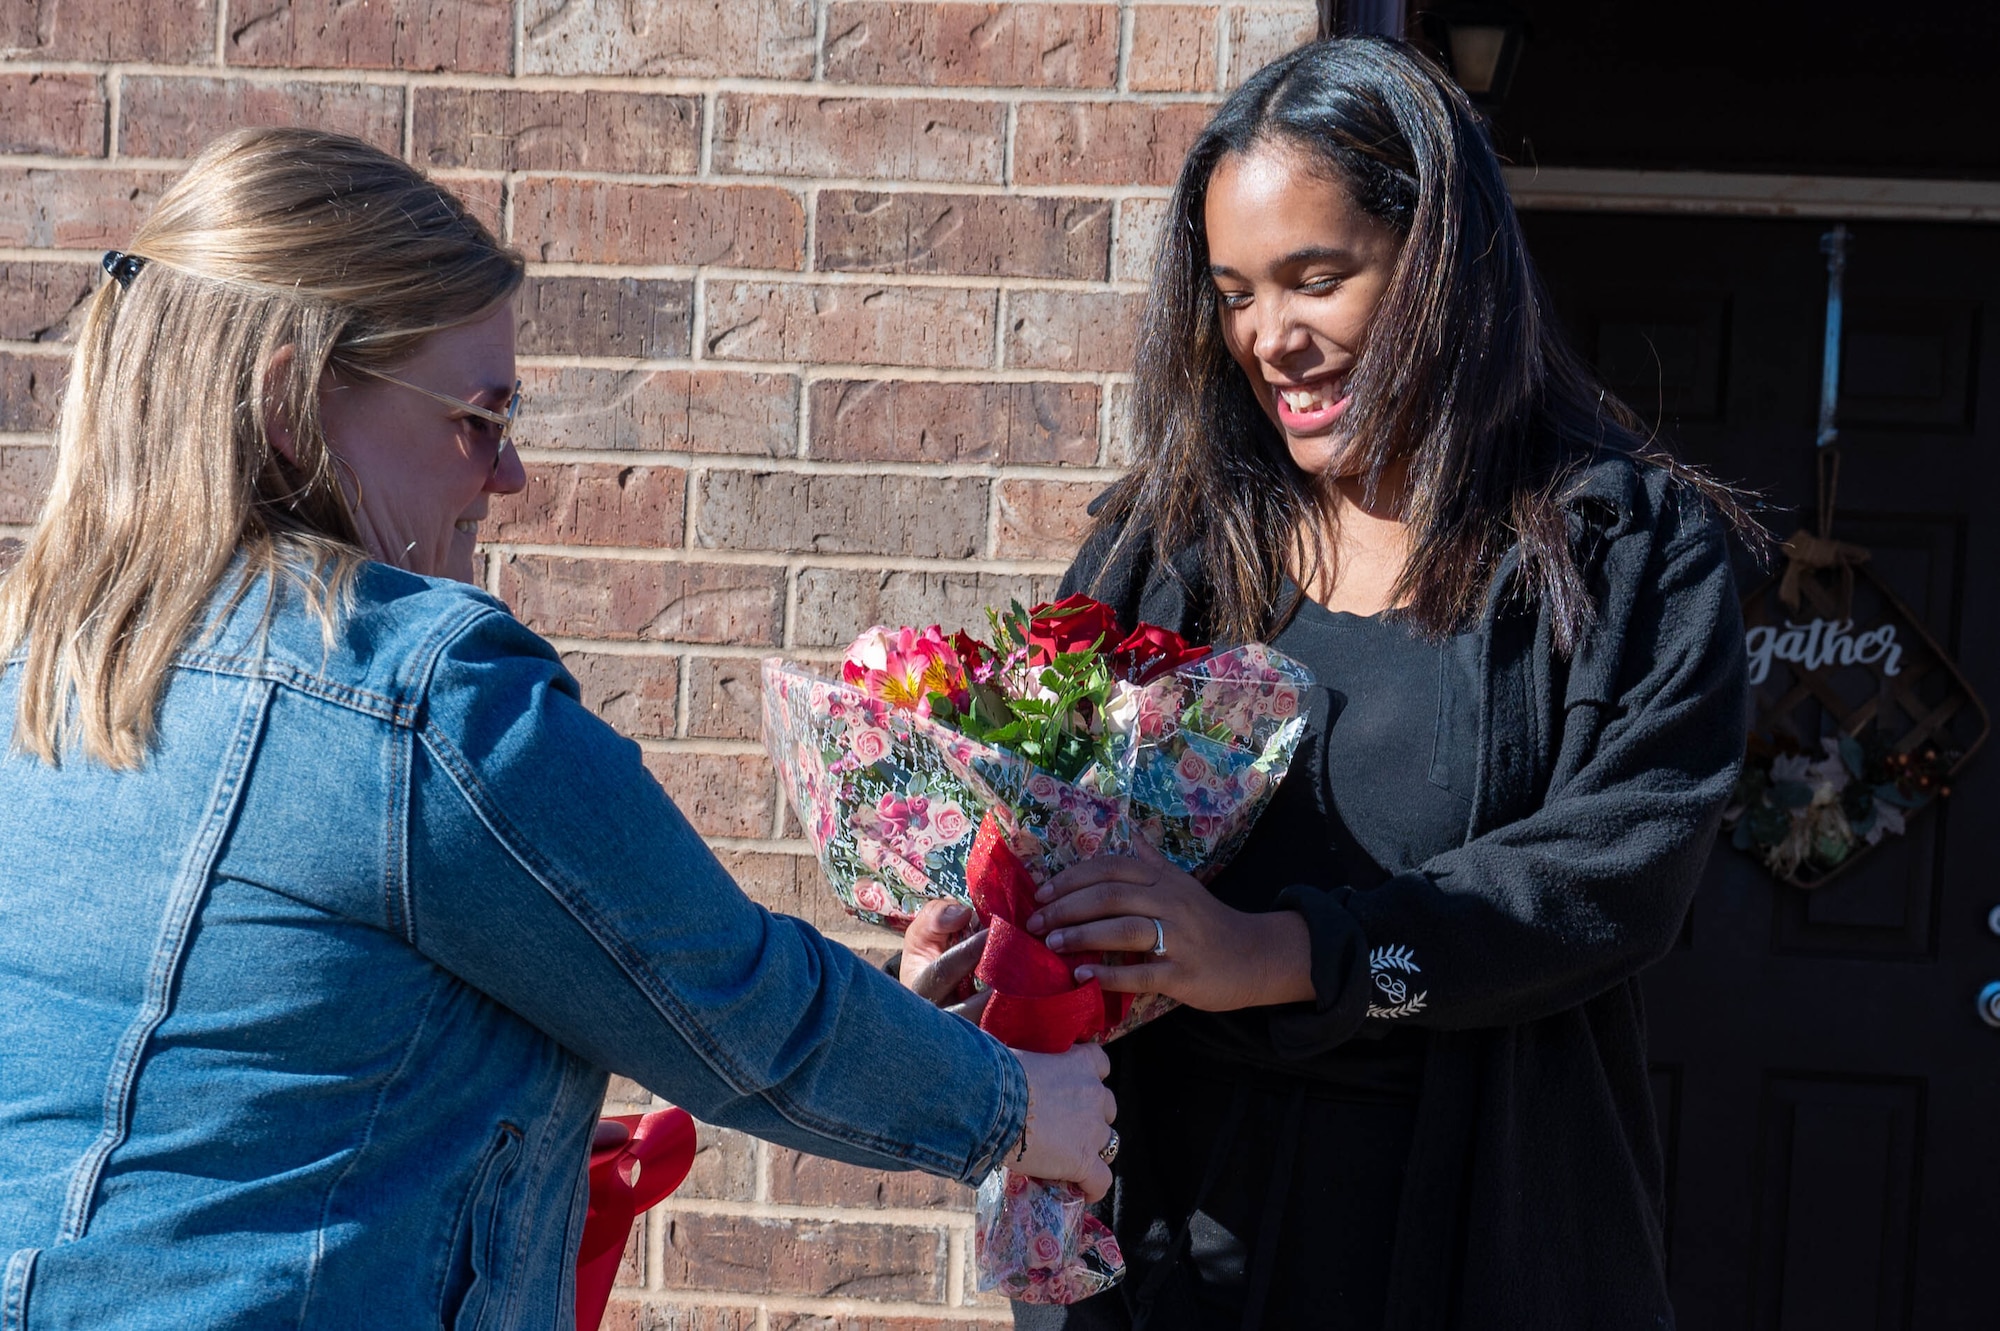 Daniele Fabis (left), 97th Force Support Squadron Family Child Care (FCC) coordinator, gives Roisveli Matos, FCC provider, a bouquet of flowers at a ribbon-cutting ceremony at Altus Air Force Base, Oklahoma, Jan. 29, 2024. The ceremony was held to celebrate Matos opening her FCC home on base to support Airmen. (U.S. Air Force photo by Airman 1st Class Heidi Bucins)